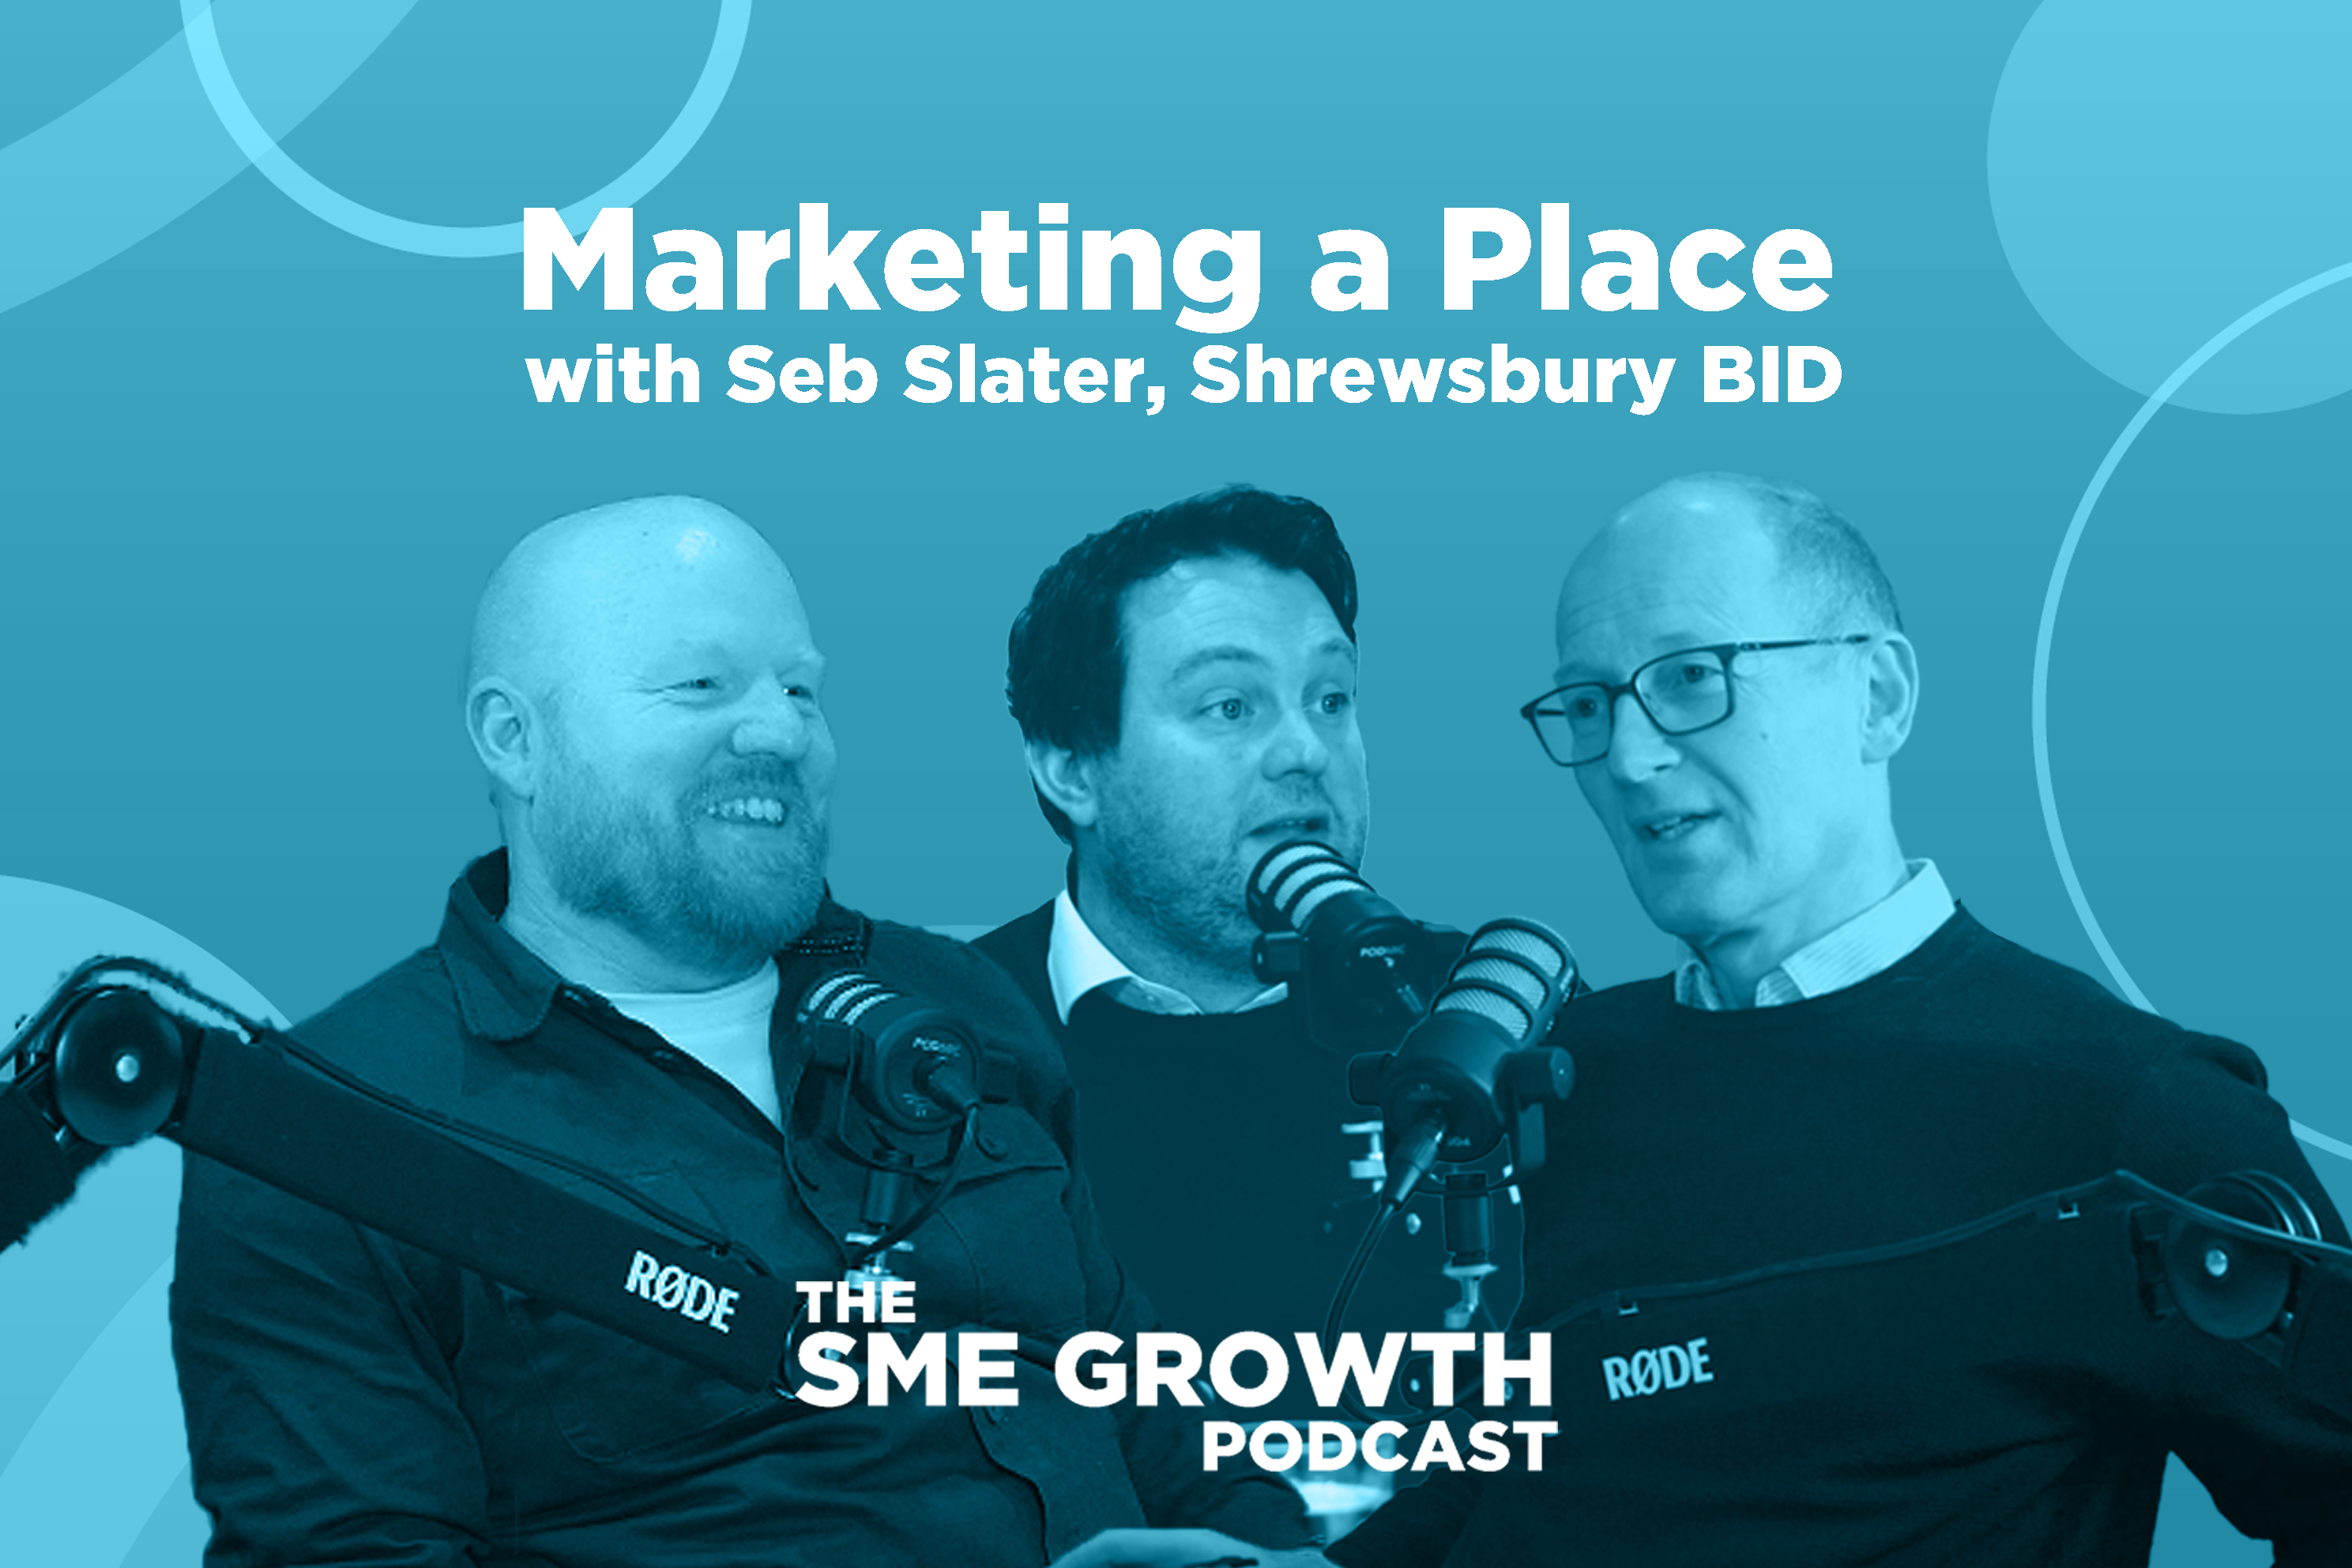 Marketing a Place with Seb Slater, Shrewsbury BID, The SME Growth podcast. Three males sit talking into microphones on blue background